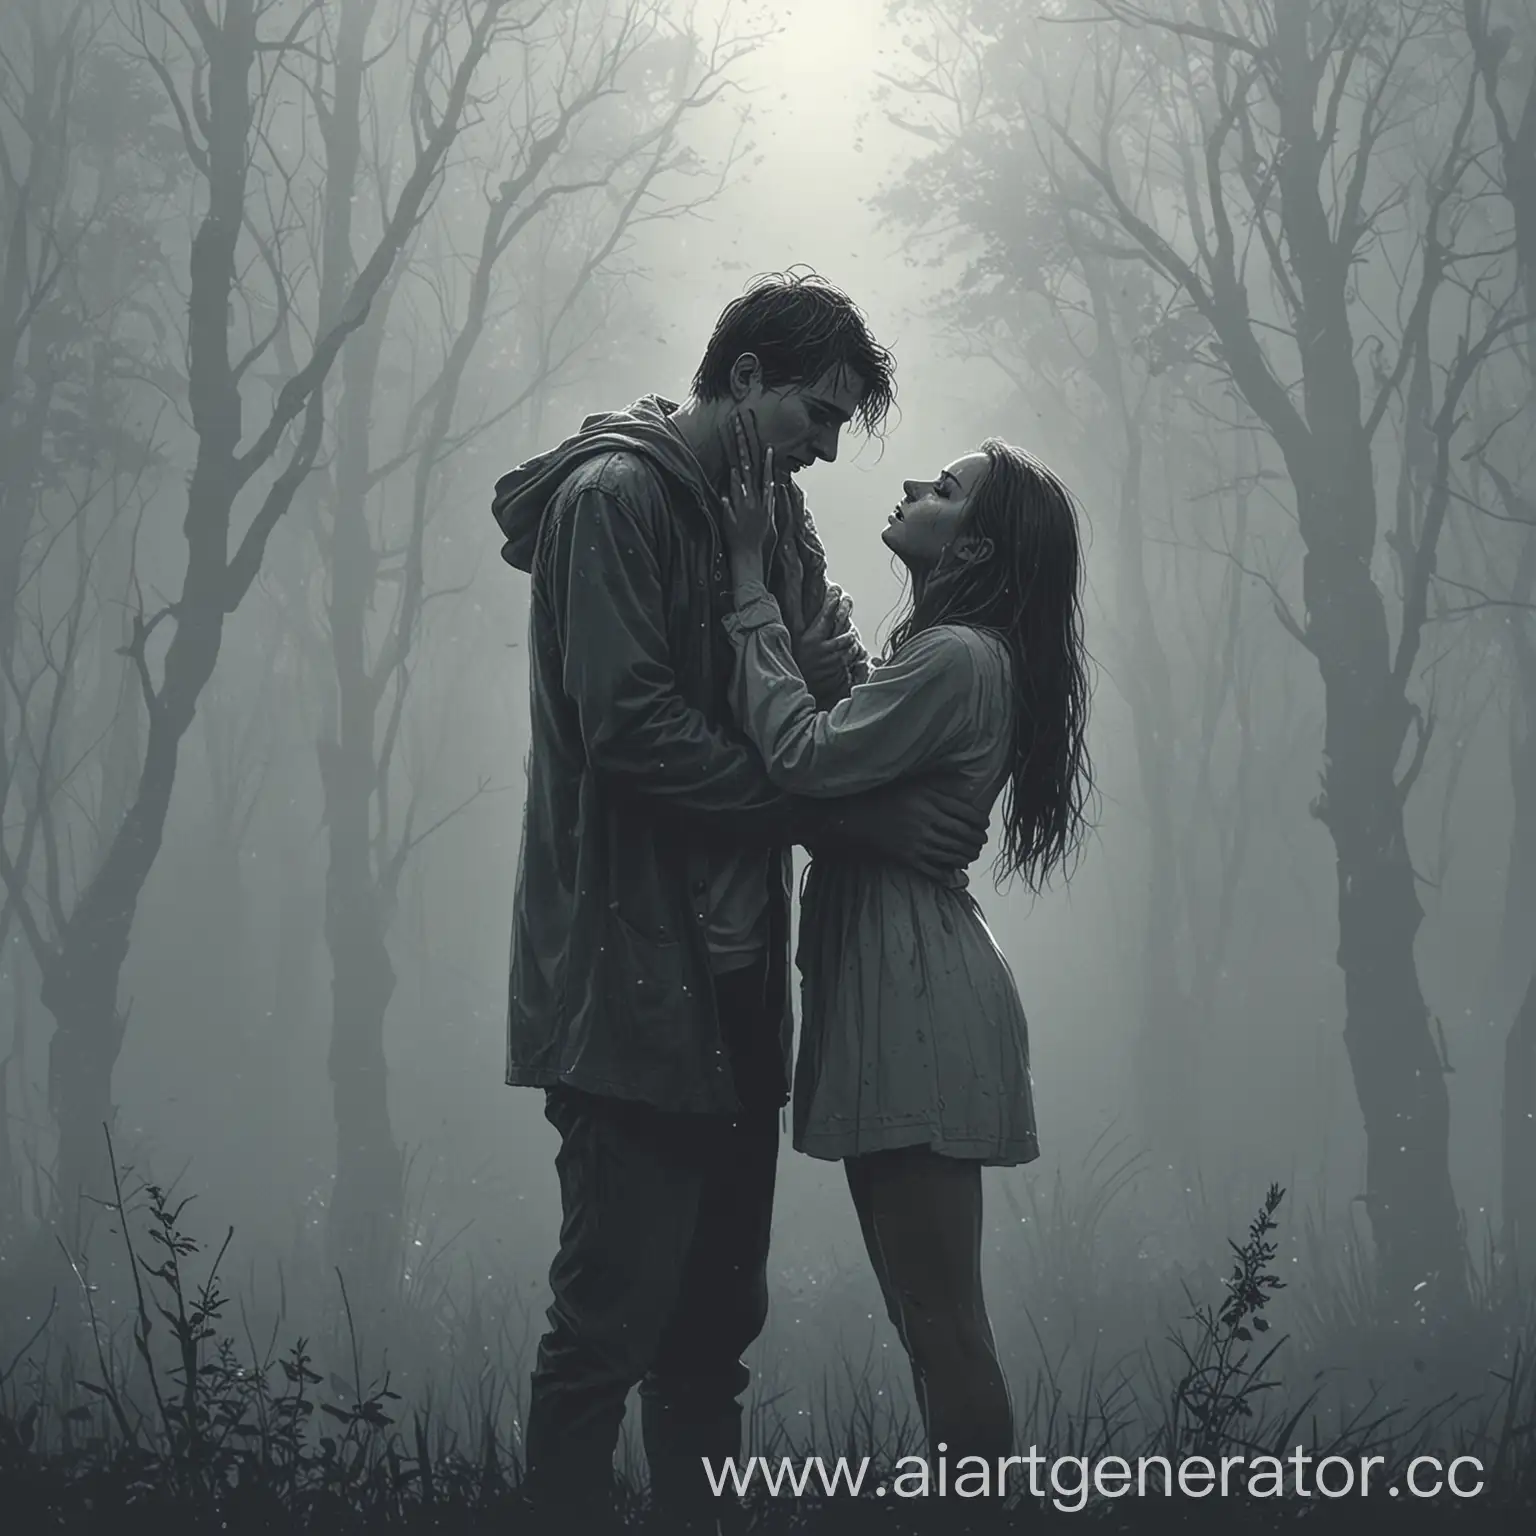 Grieving-Man-Cries-Over-Lost-Love-in-Misty-Setting